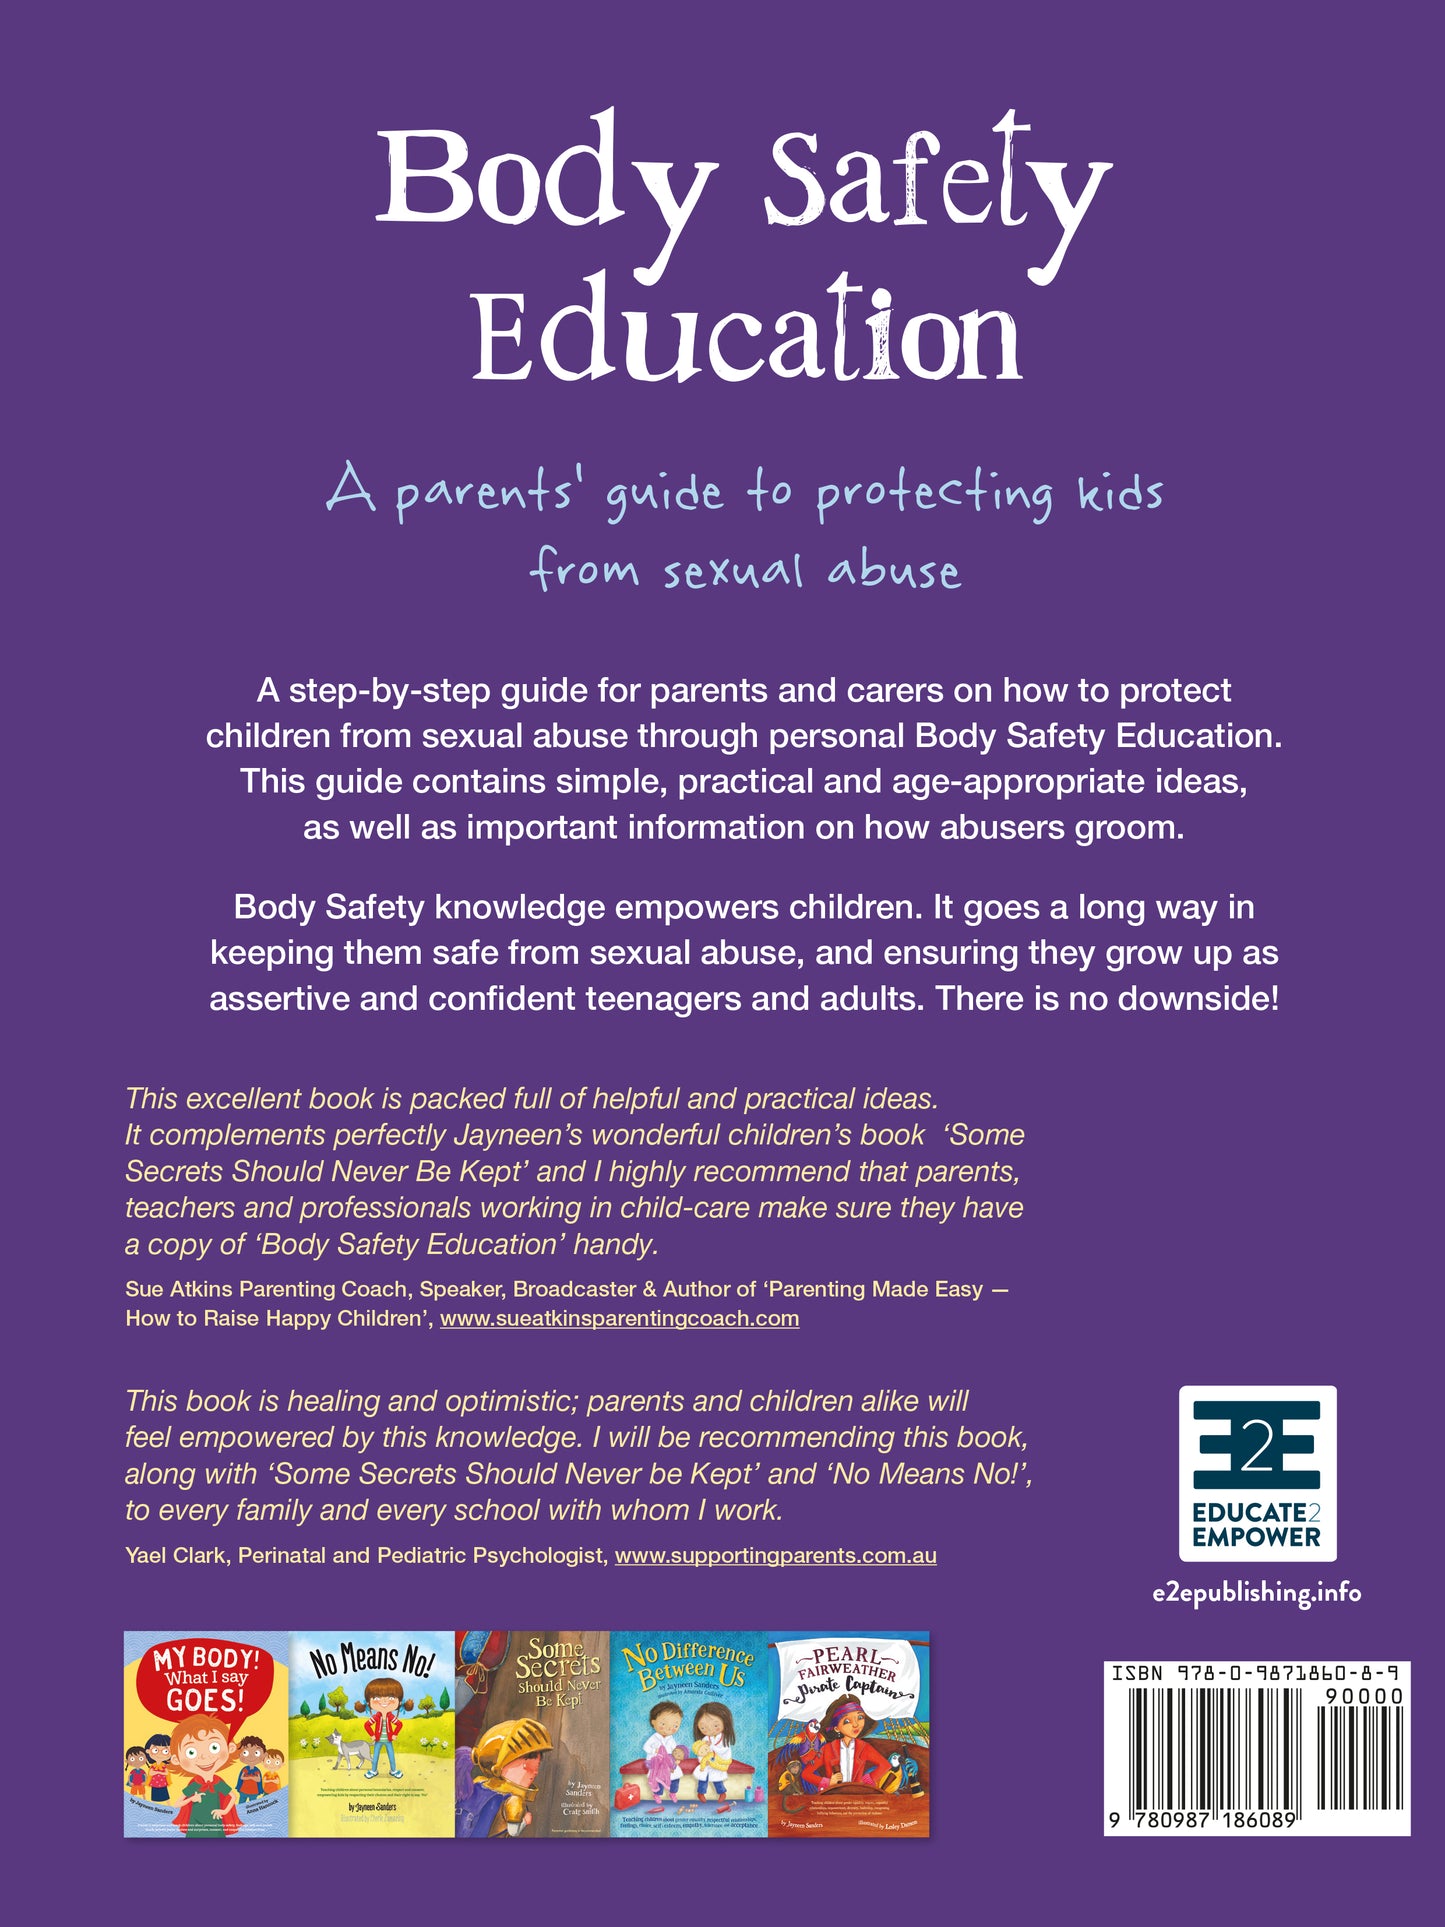 The back cover of the book ‘Body Safety Education’ by Jayneen Sanders.